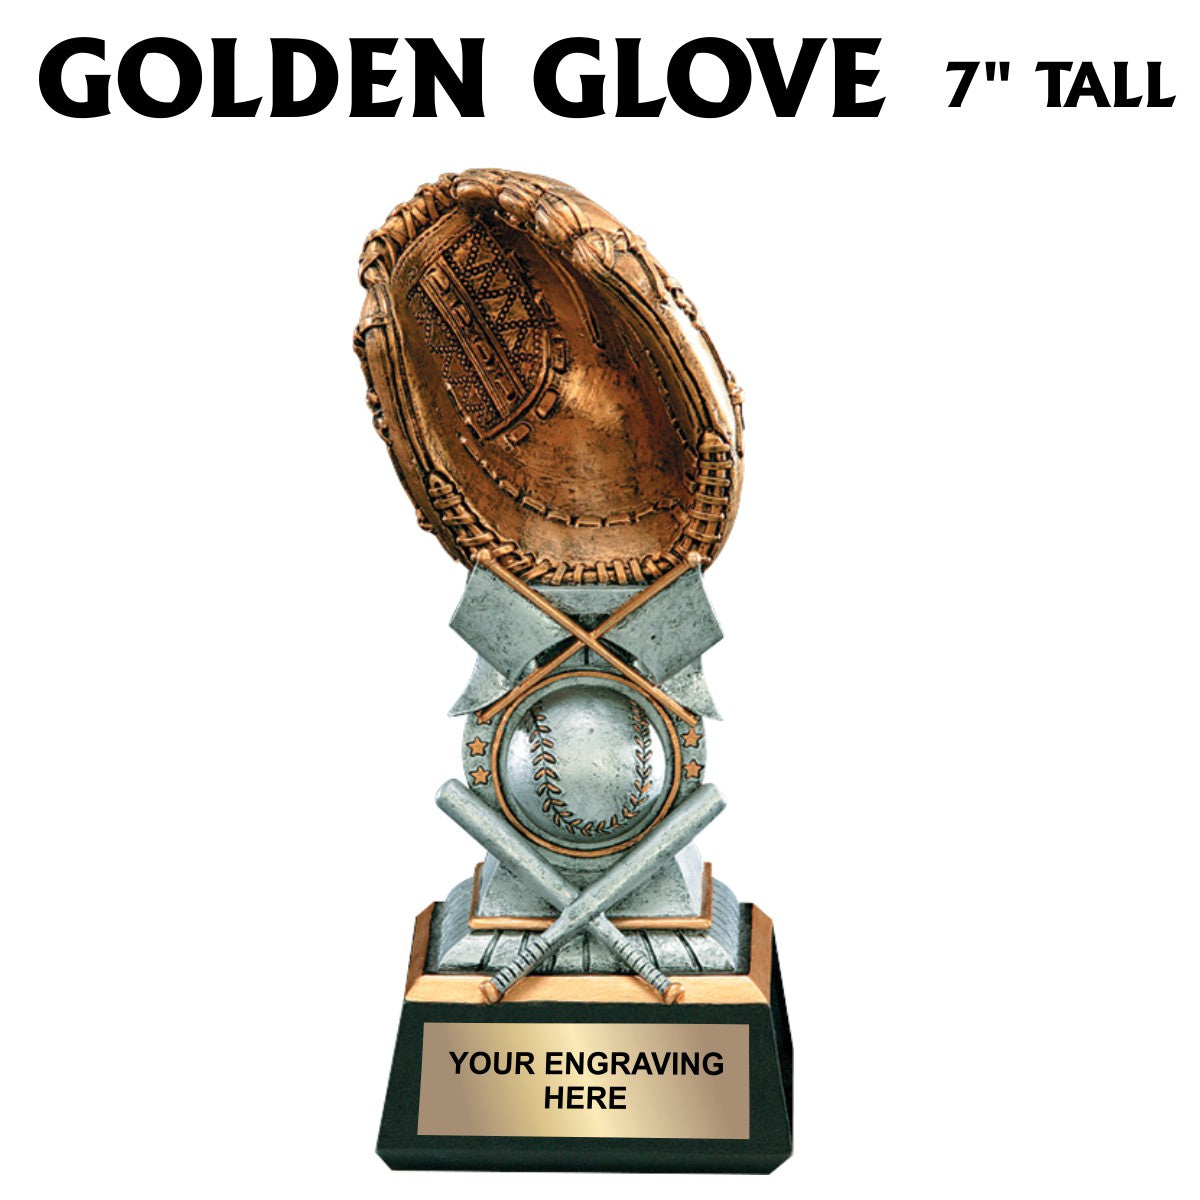 Football Glove Award Trophy Personalized Engraving 